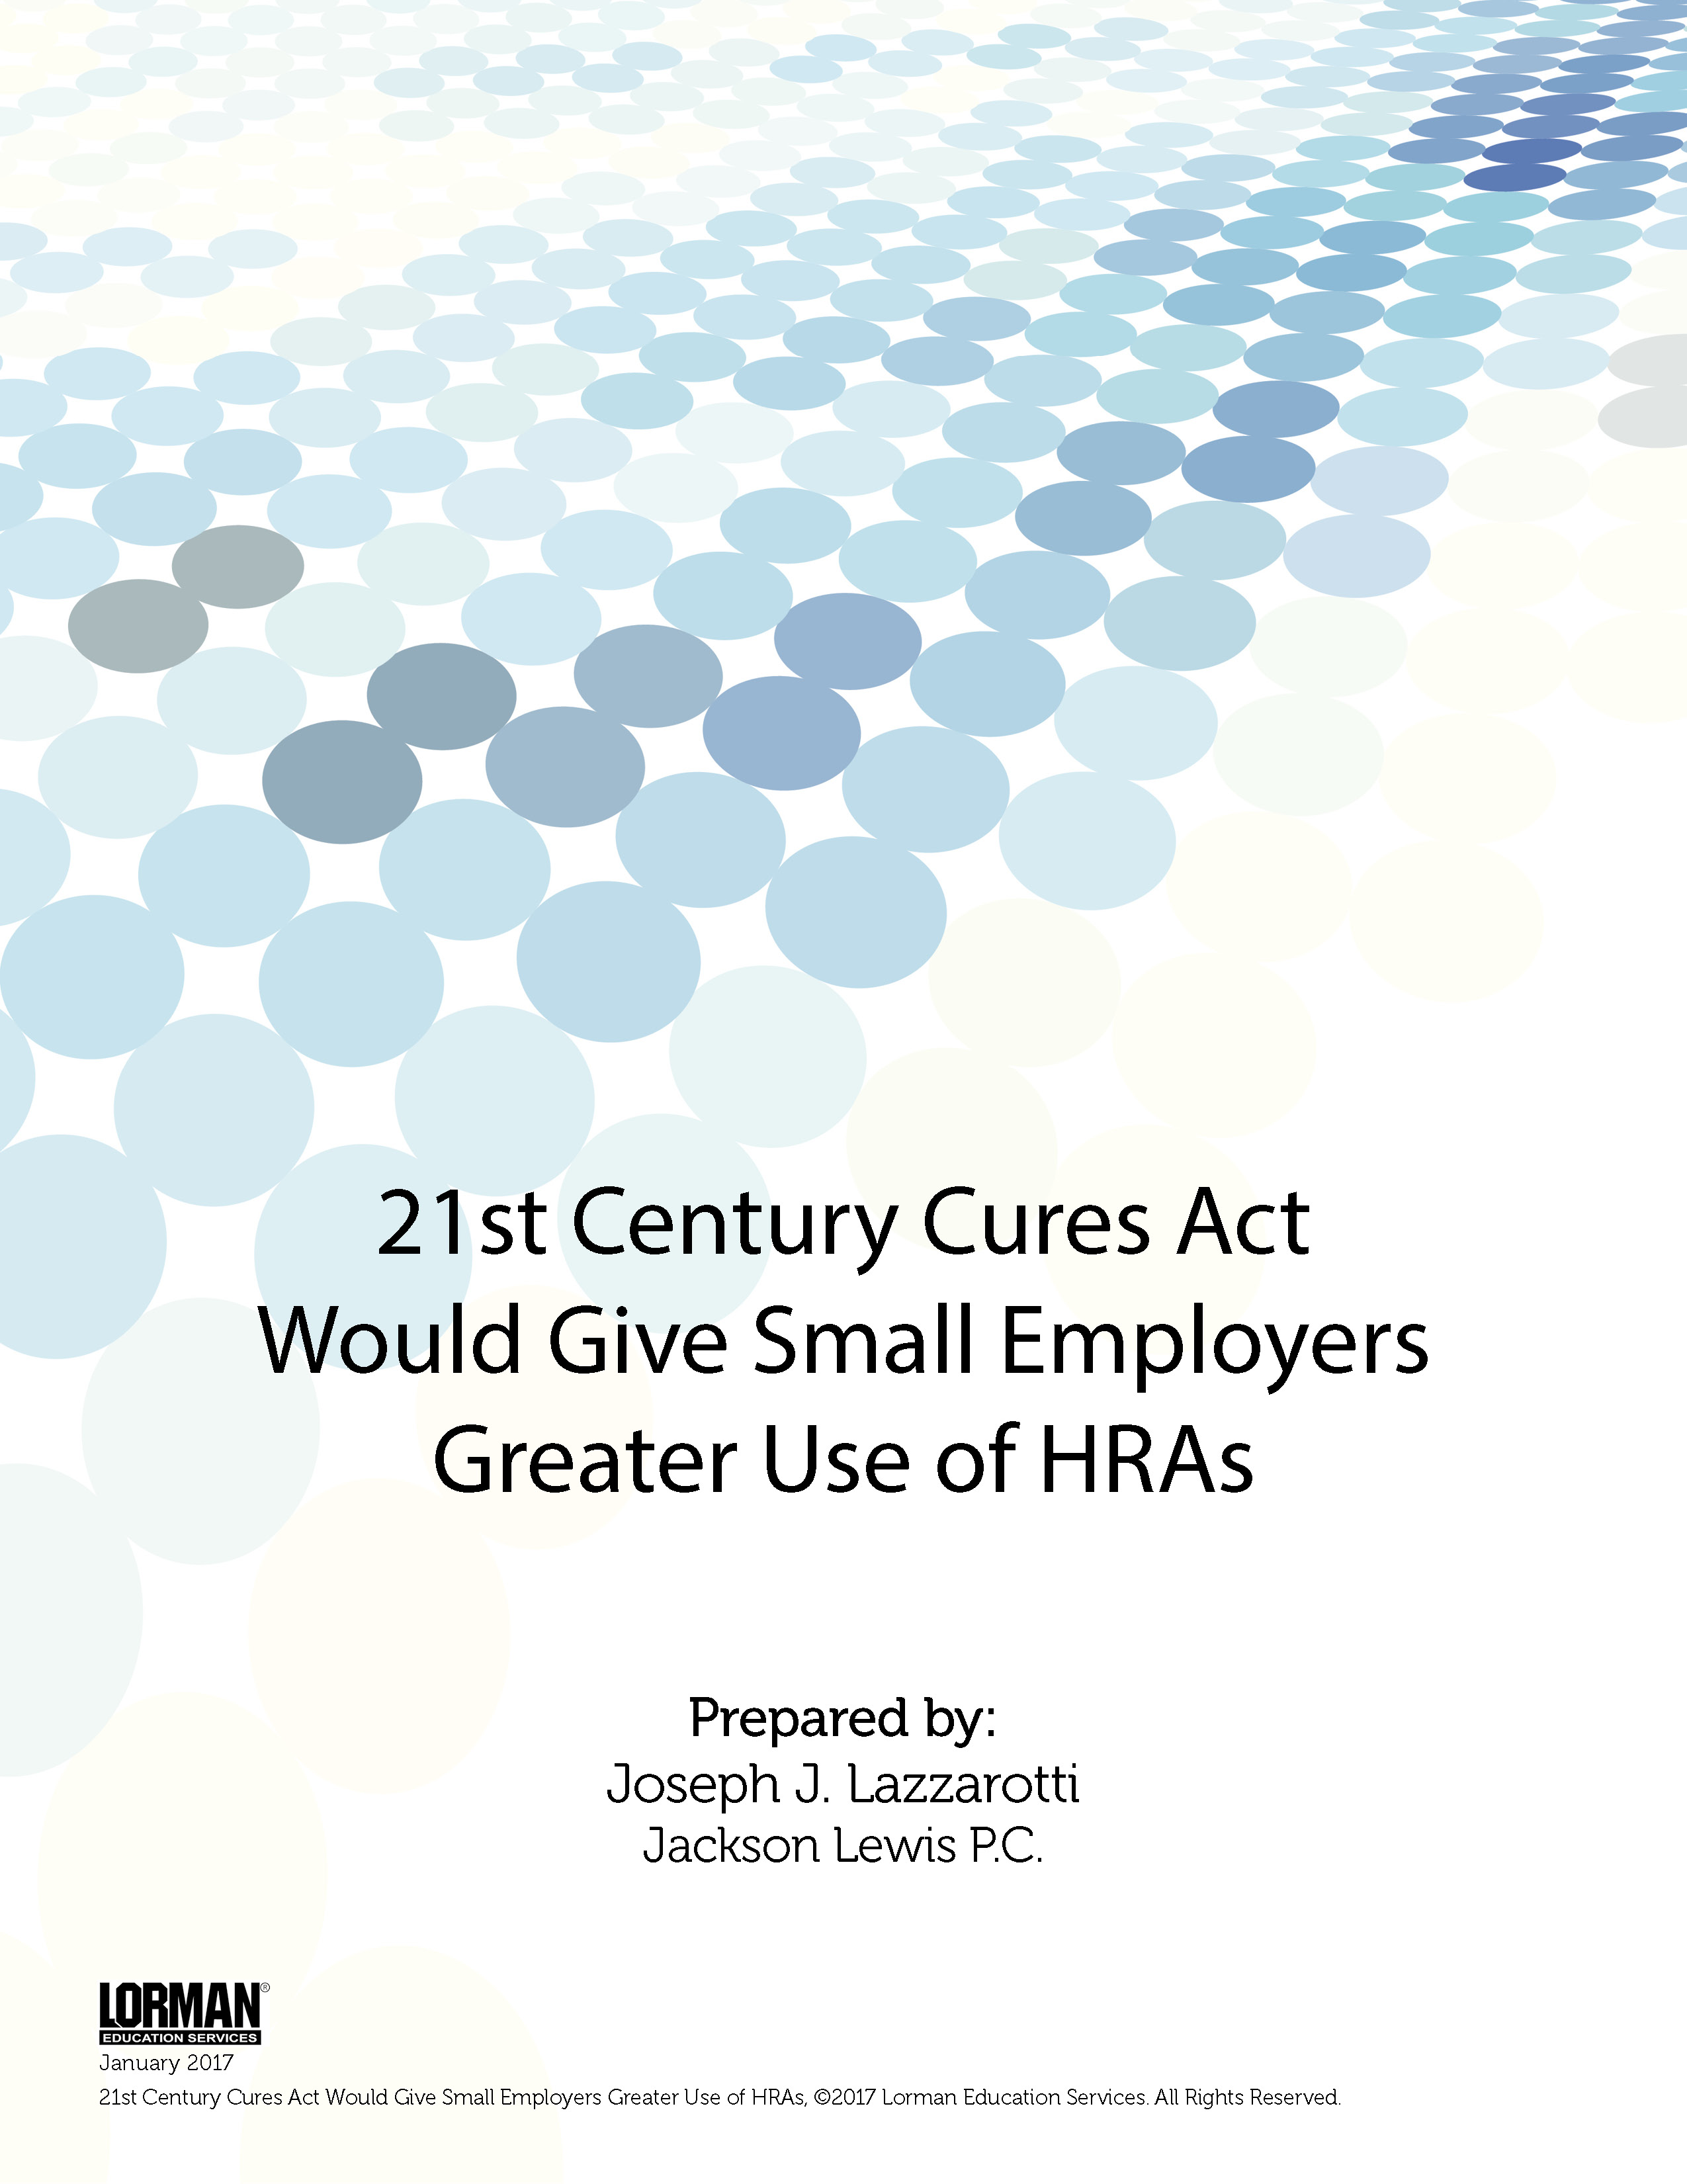 21st Century Cures Act Would Give Small Employers Greater Use of HRAs